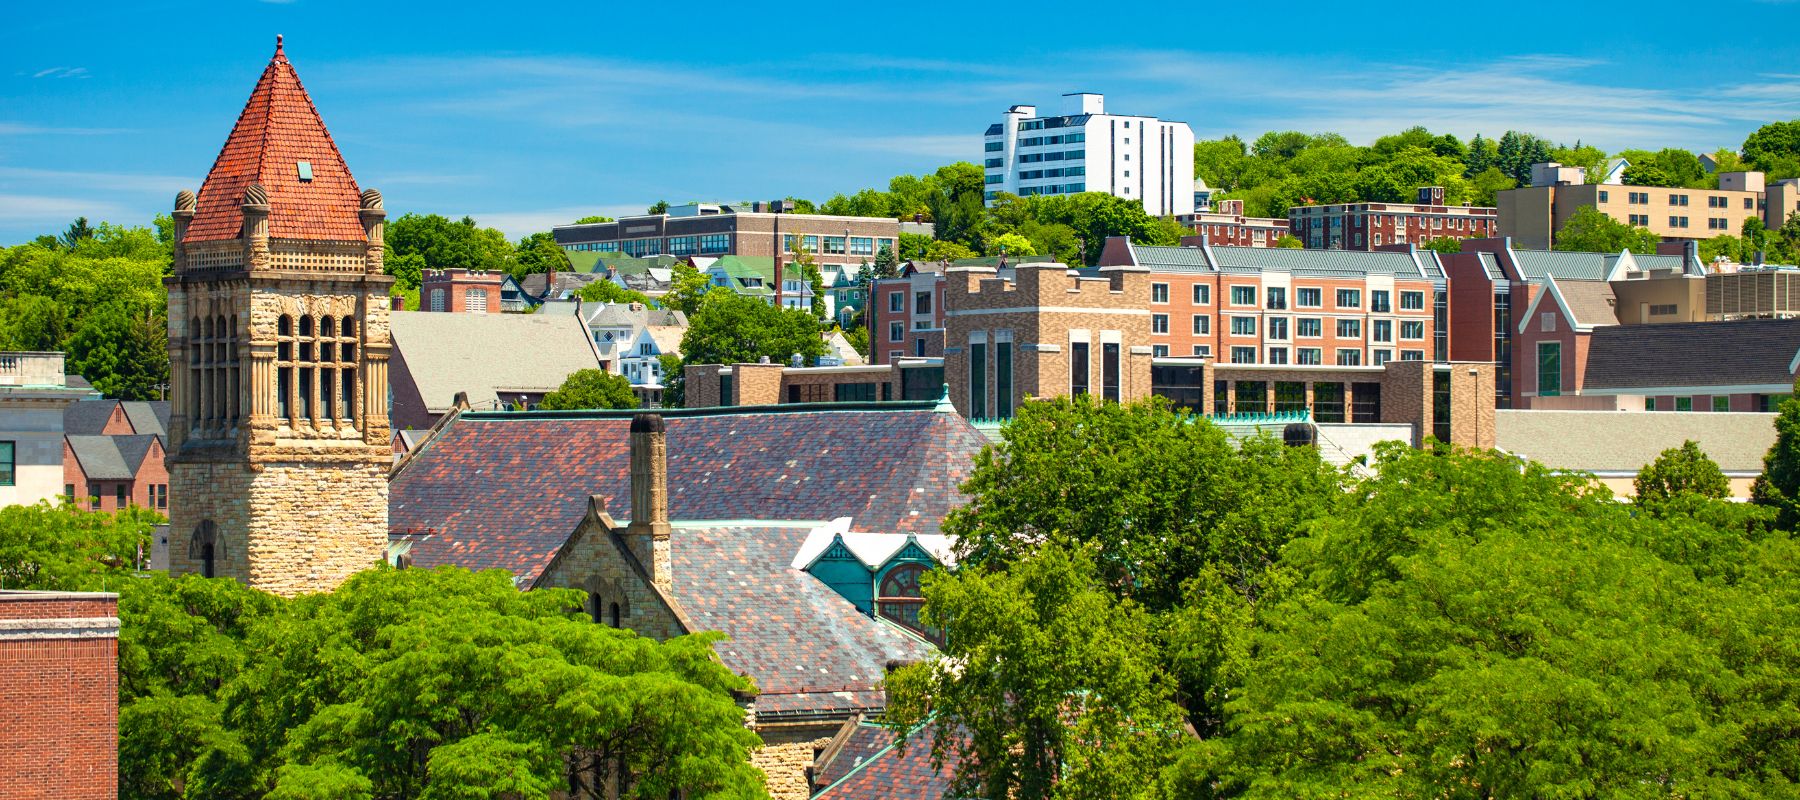 A vibrant cityscape with diverse architectural styles, including a prominent stone tower with a conical roof, modern buildings, and classic homes nestled among lush green trees under a bright blue sky